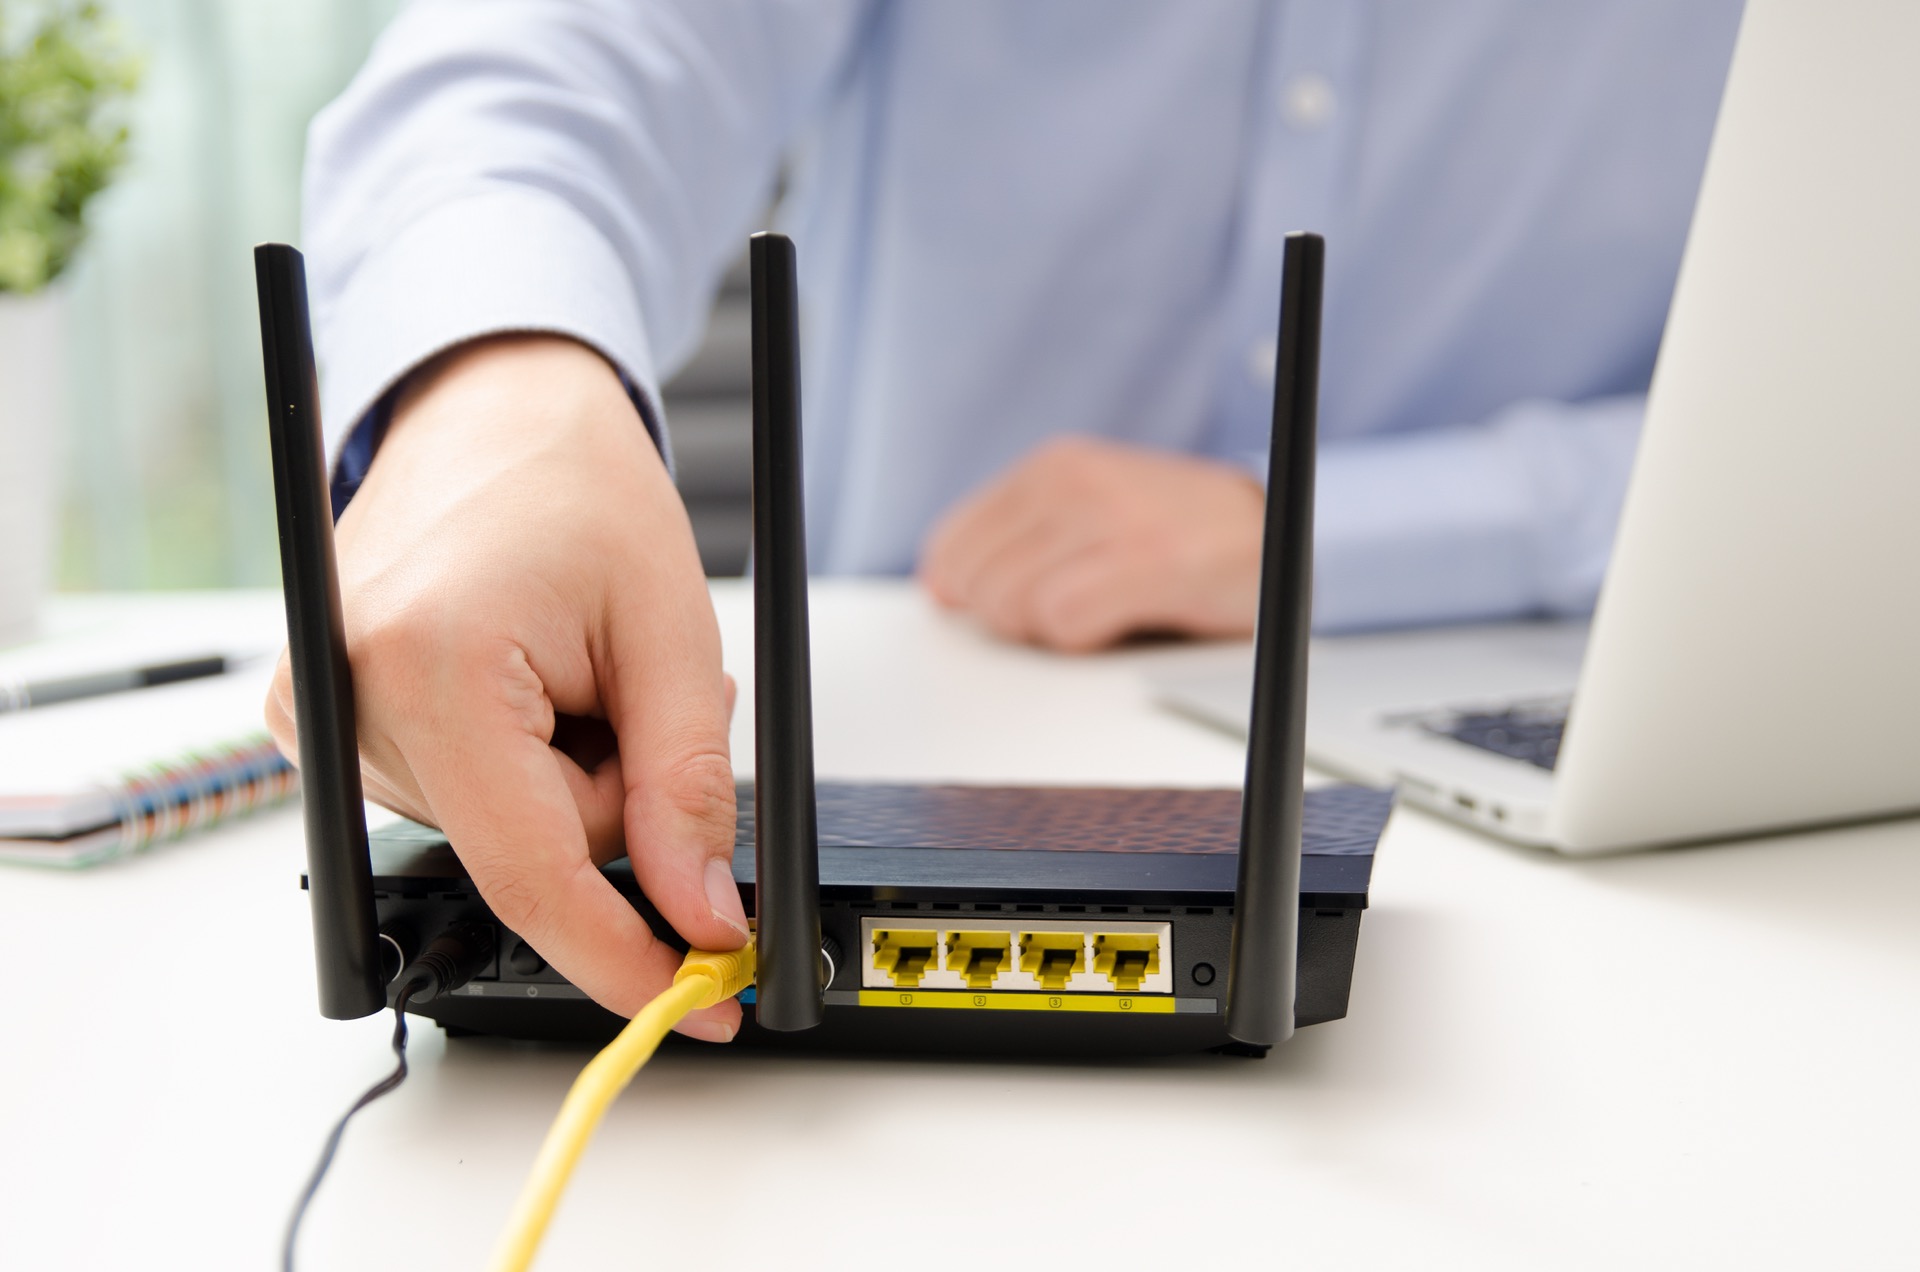 Man plugs Ethernet cable into router